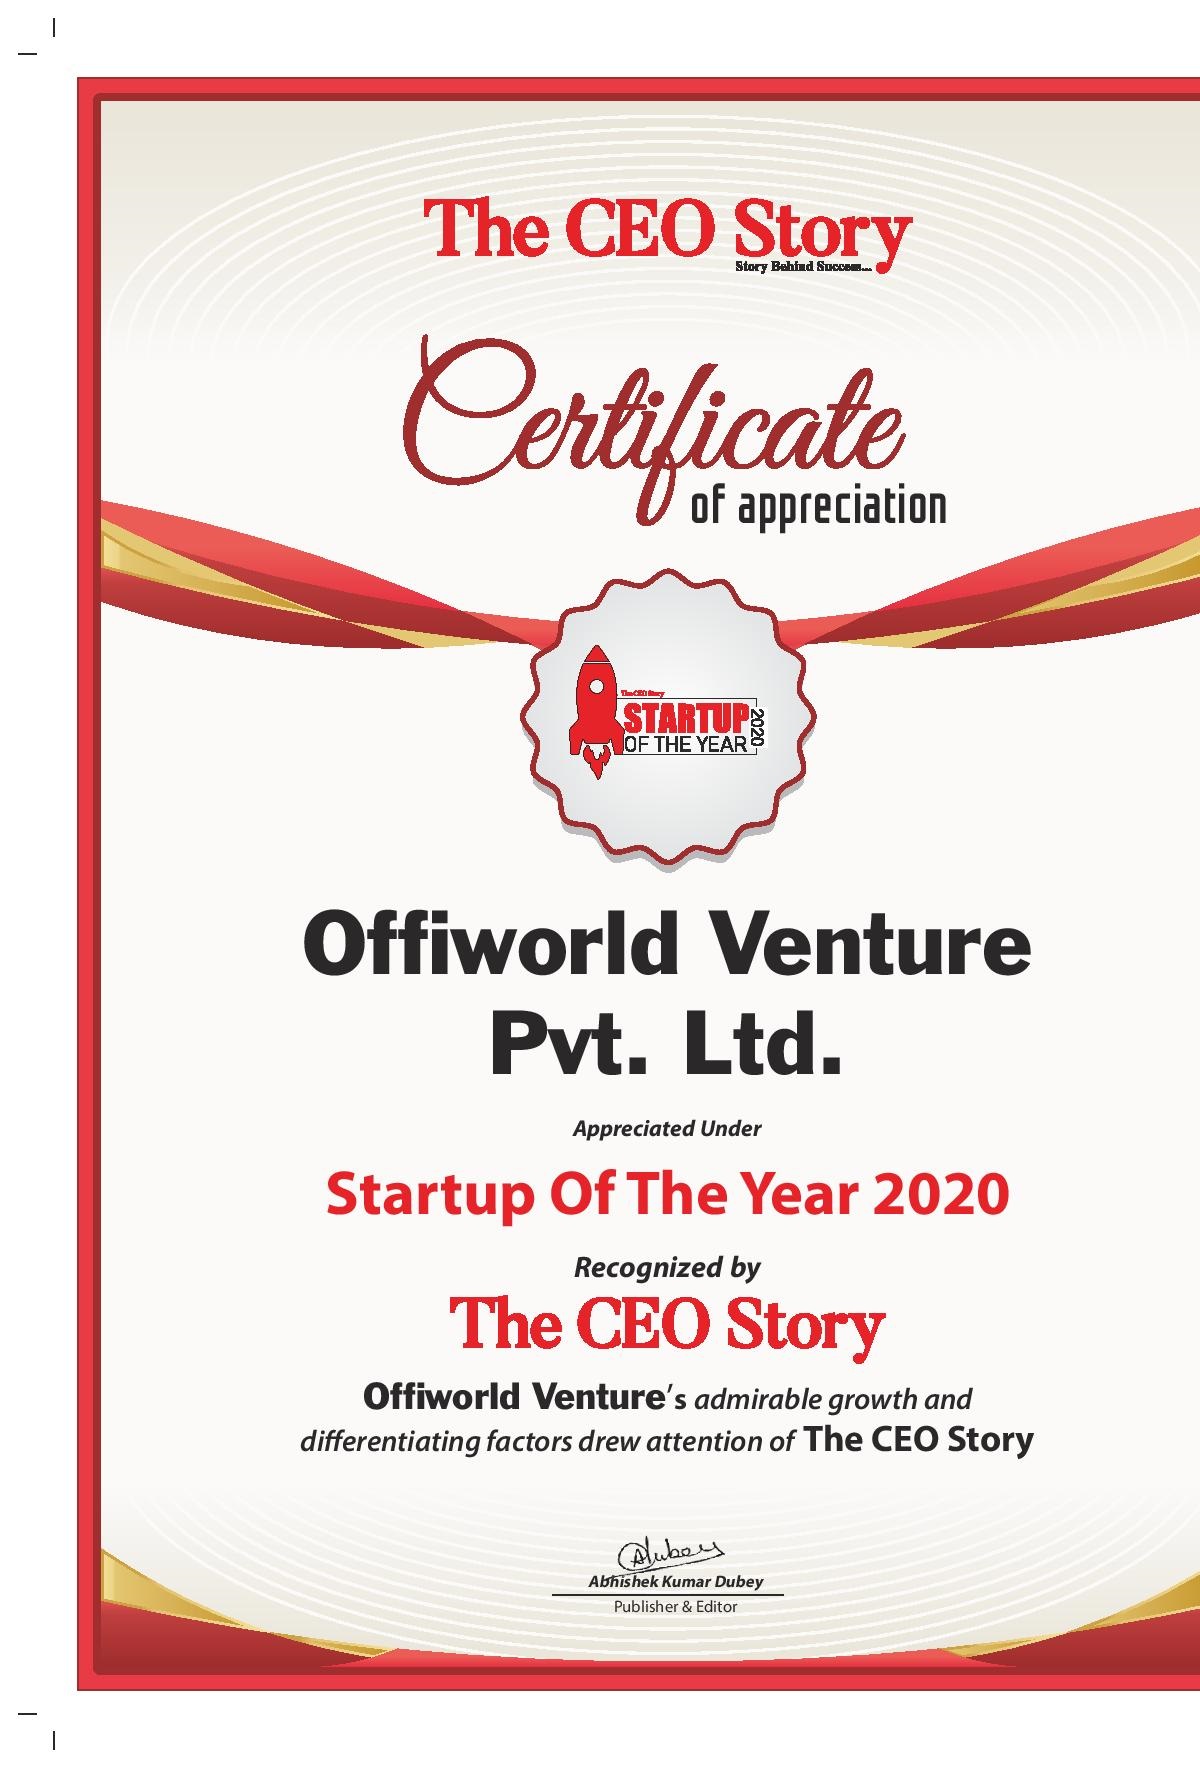 Offiworld Venture Pvt. Ltd. appreciated under Startup of The Year 2020 recognized by The CEO Story magazine.